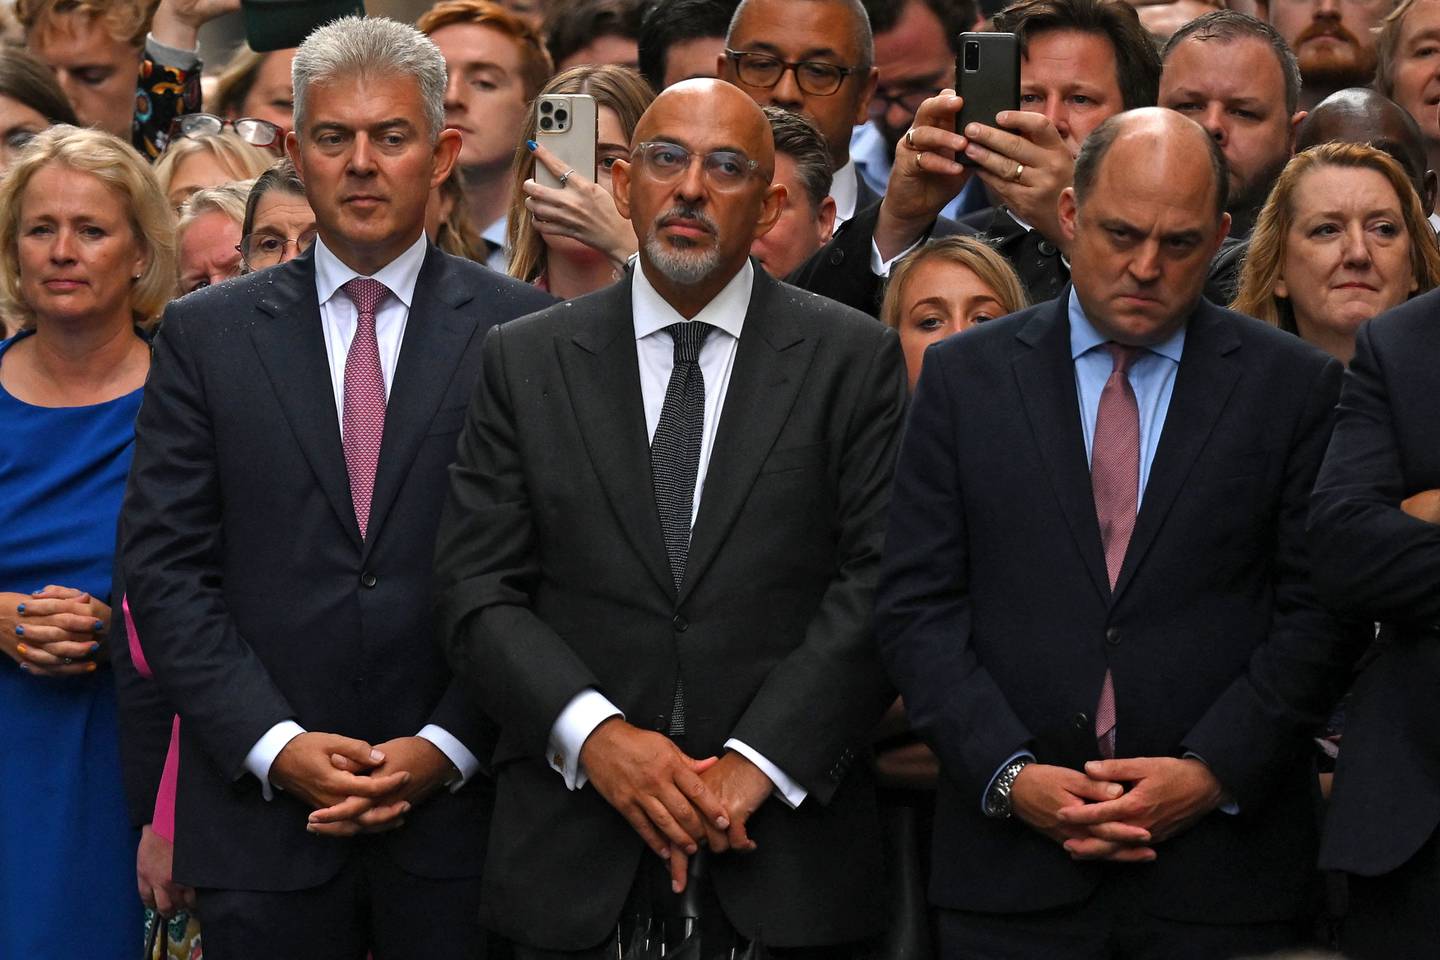 Former chancellor Nadhim Zahawi waits alongside former Northern Ireland secretary Brandon Lewis and Britain's Defence Secretary Ben Wallace for newly appointed Prime Minister Liz Truss to deliver a speech outside 10 Downing Street on Tuesday. AFP